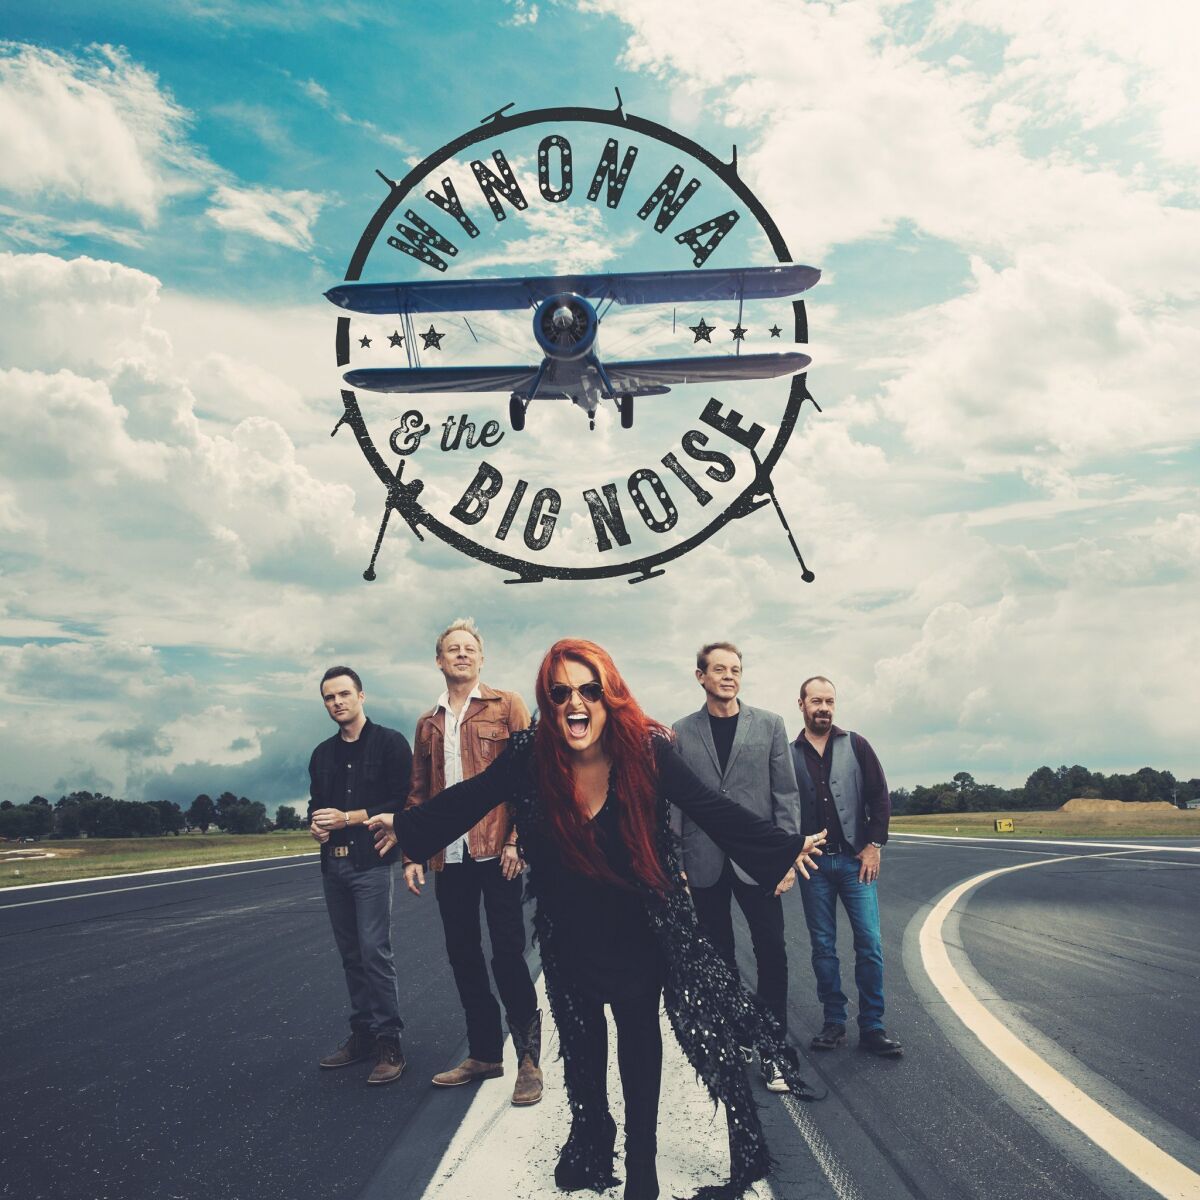 Famed country singer Wynonna will perform with her band, The Big Noise, at The Magnolia on Saturday 2/8. 